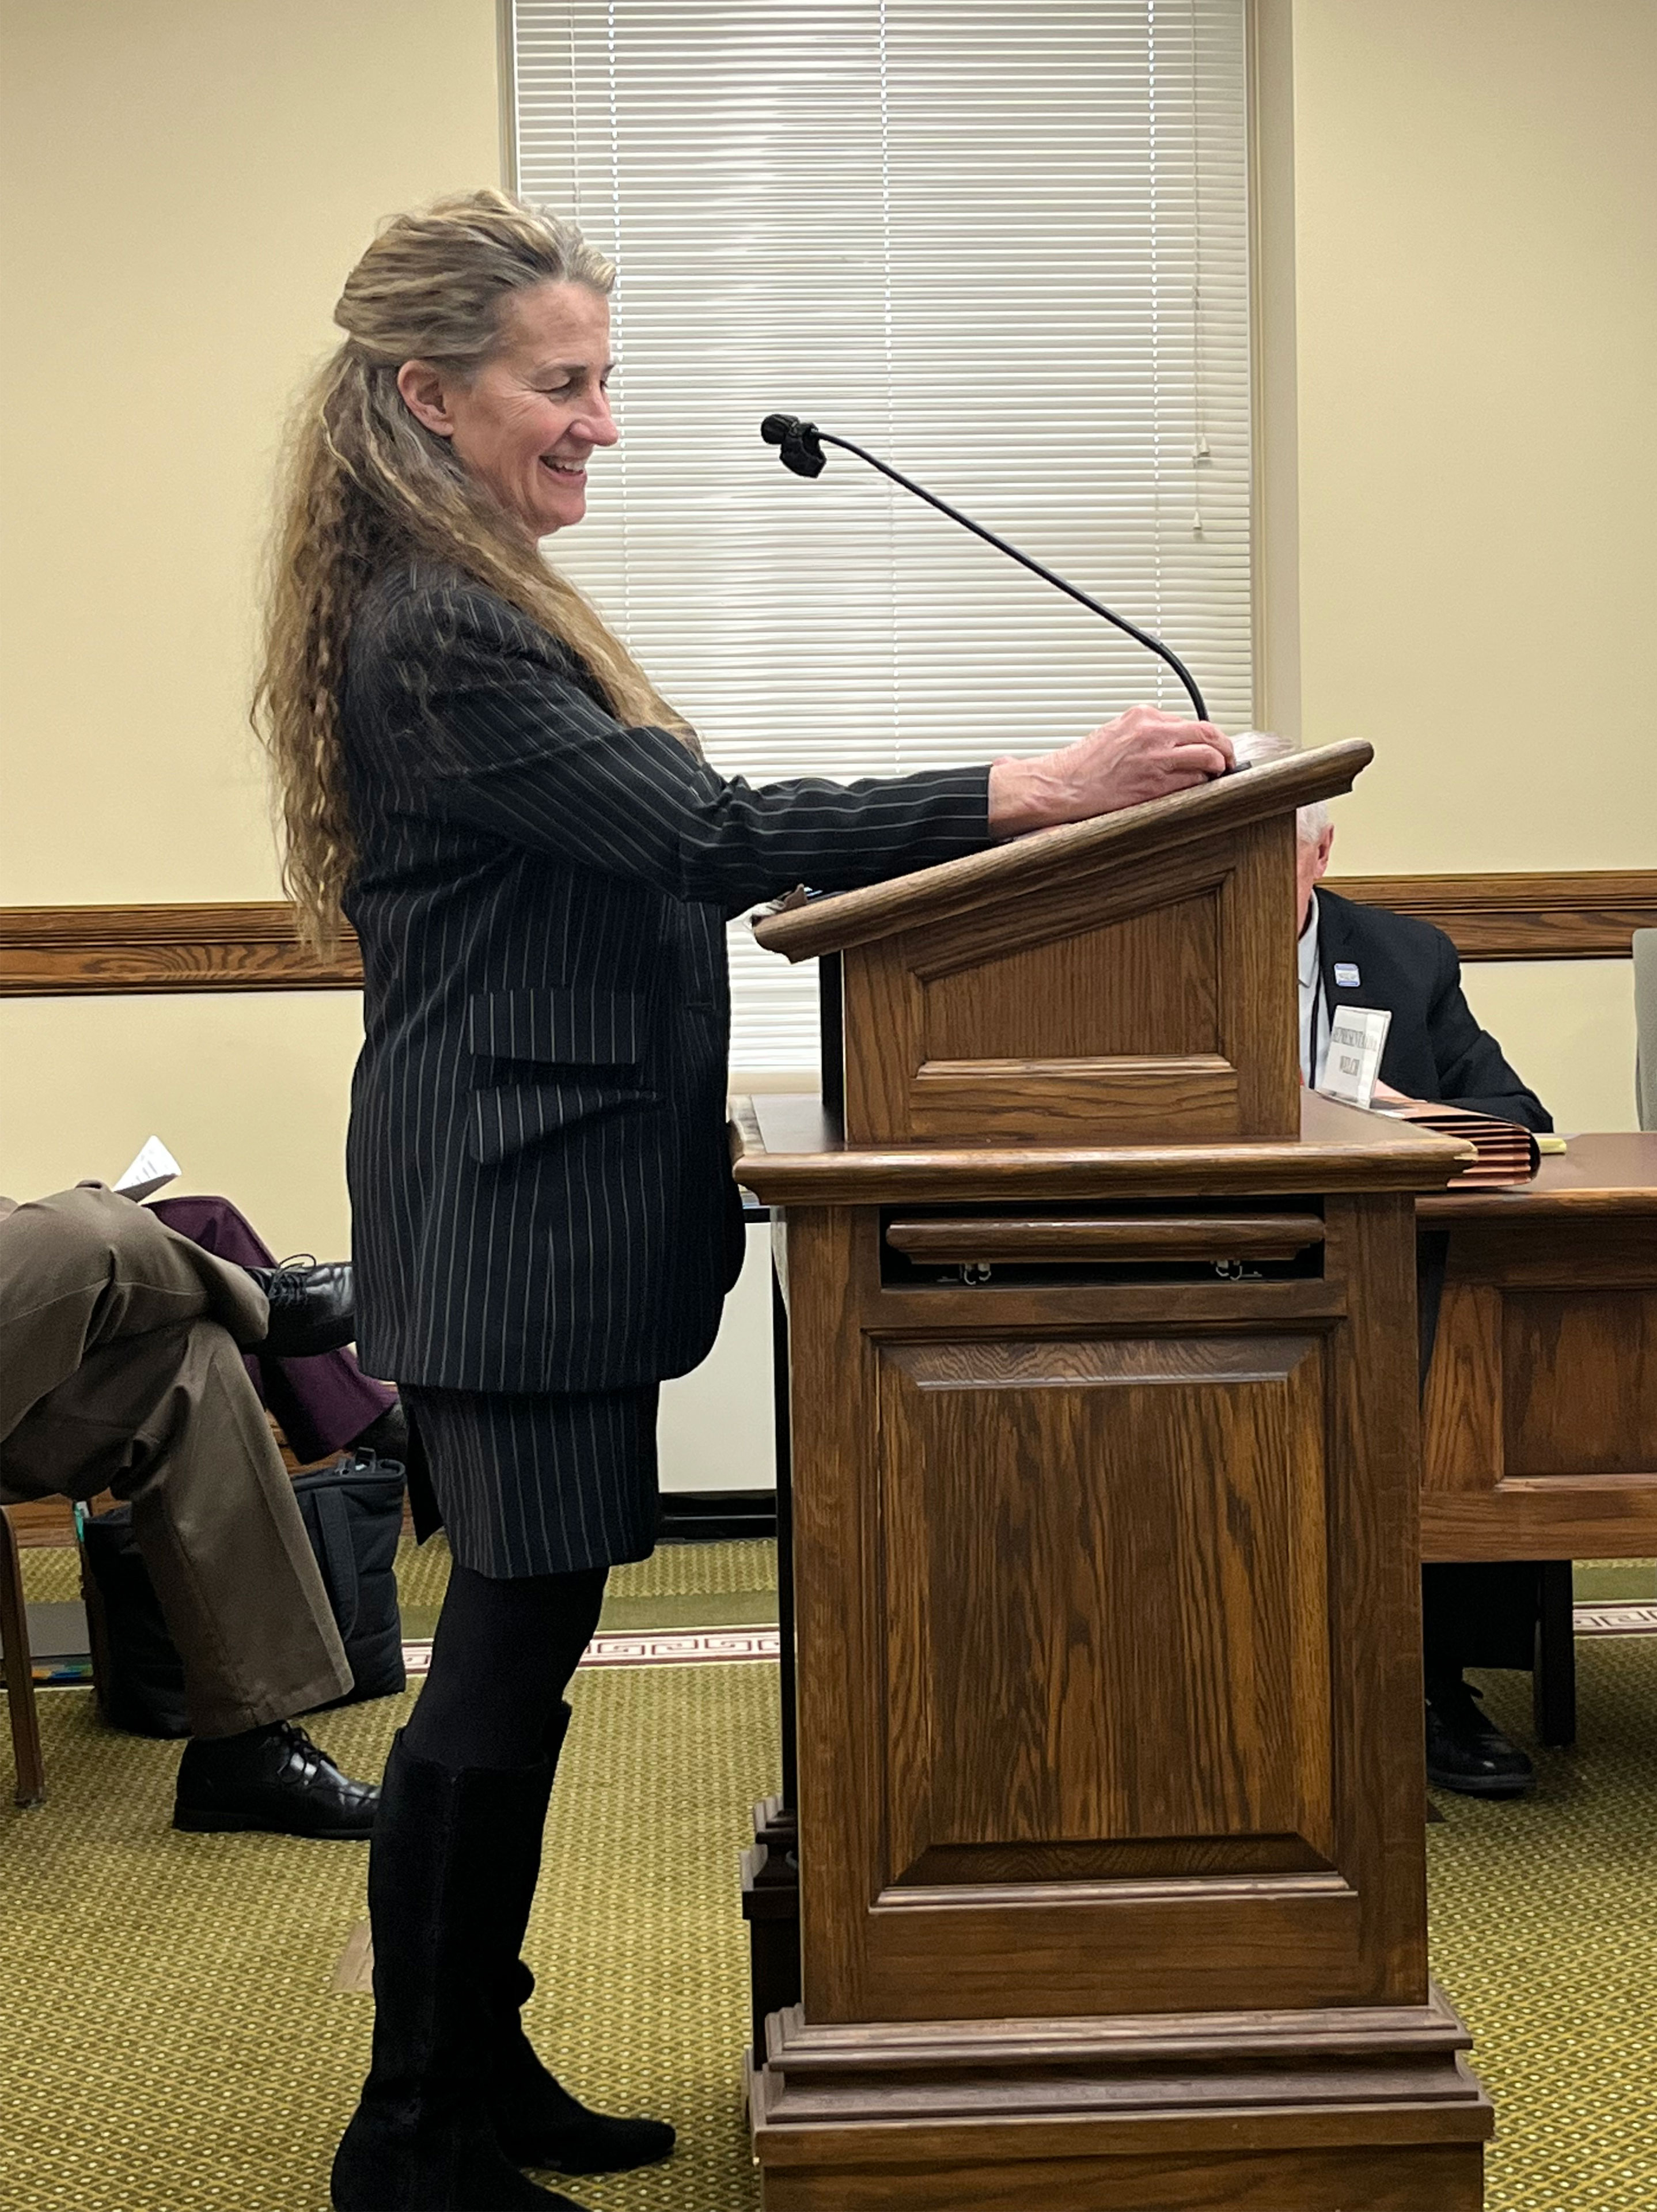 A photo shows Rep. Mary Caferro speaking at a podium.